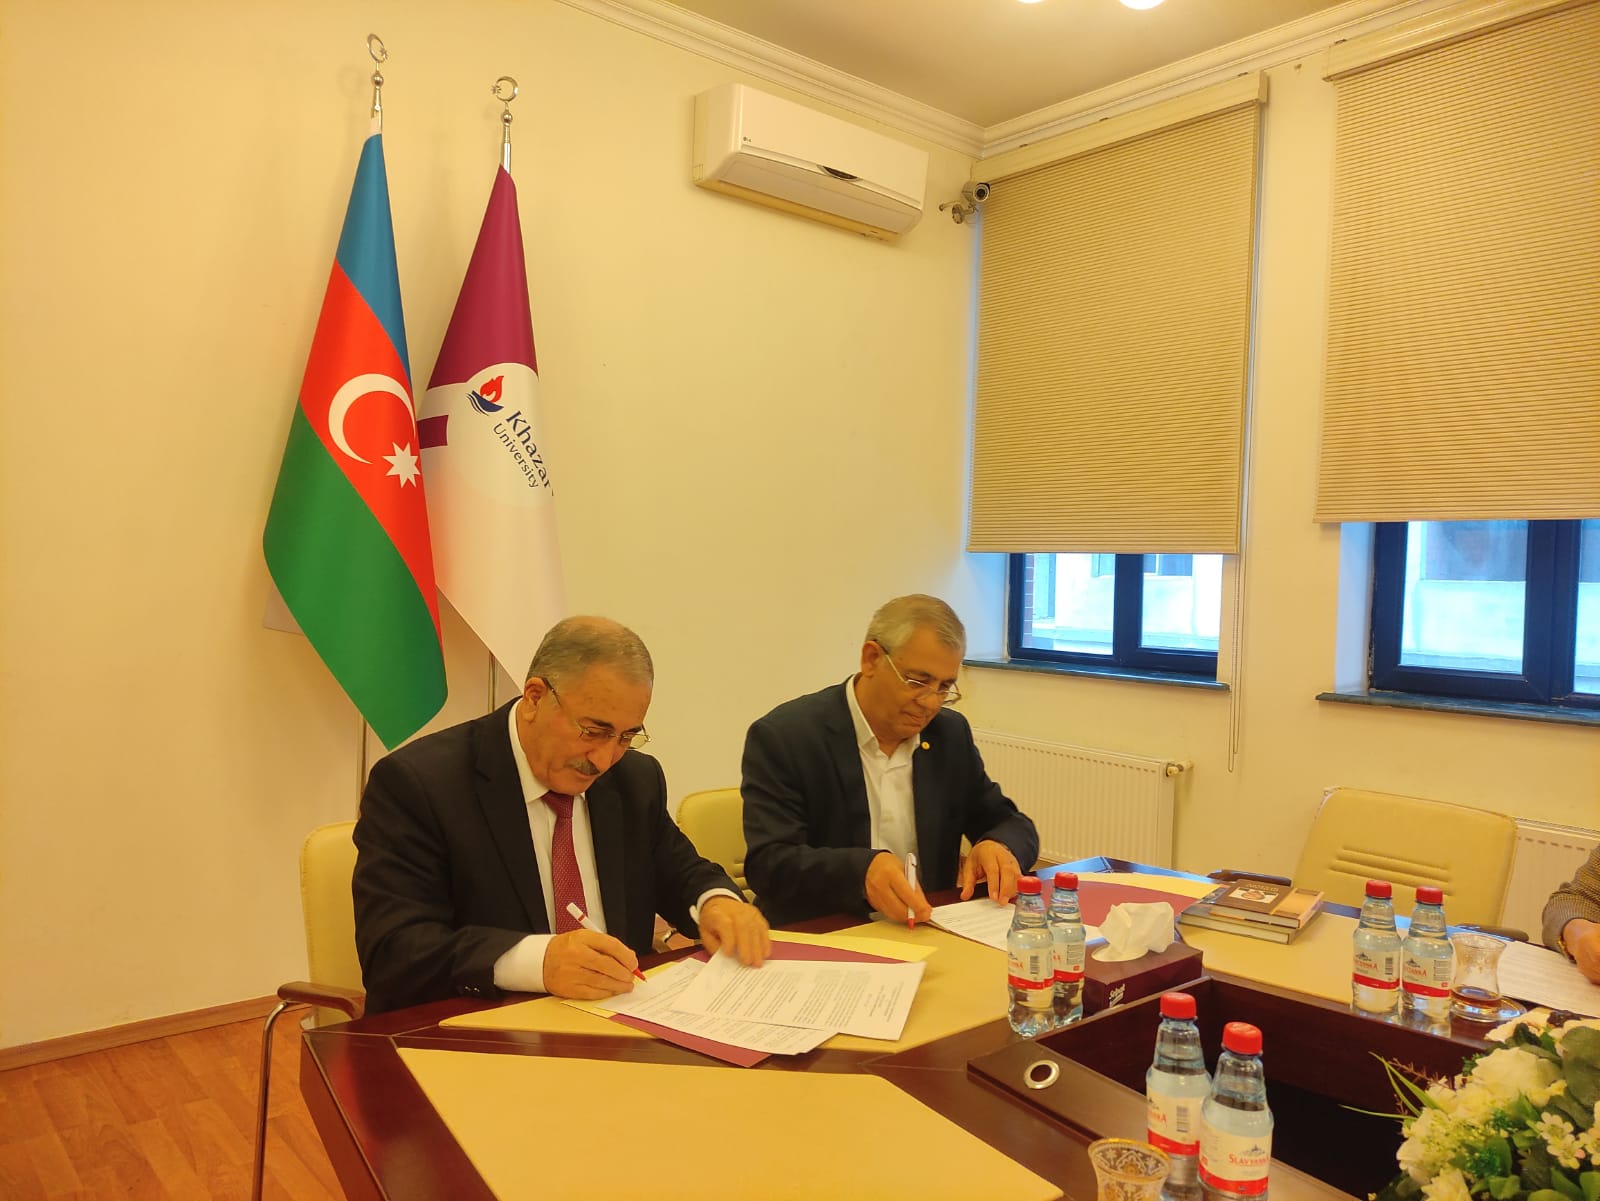 The agreement was signed between the Institute of Soil Science and Agrochemistry and Khazar University.